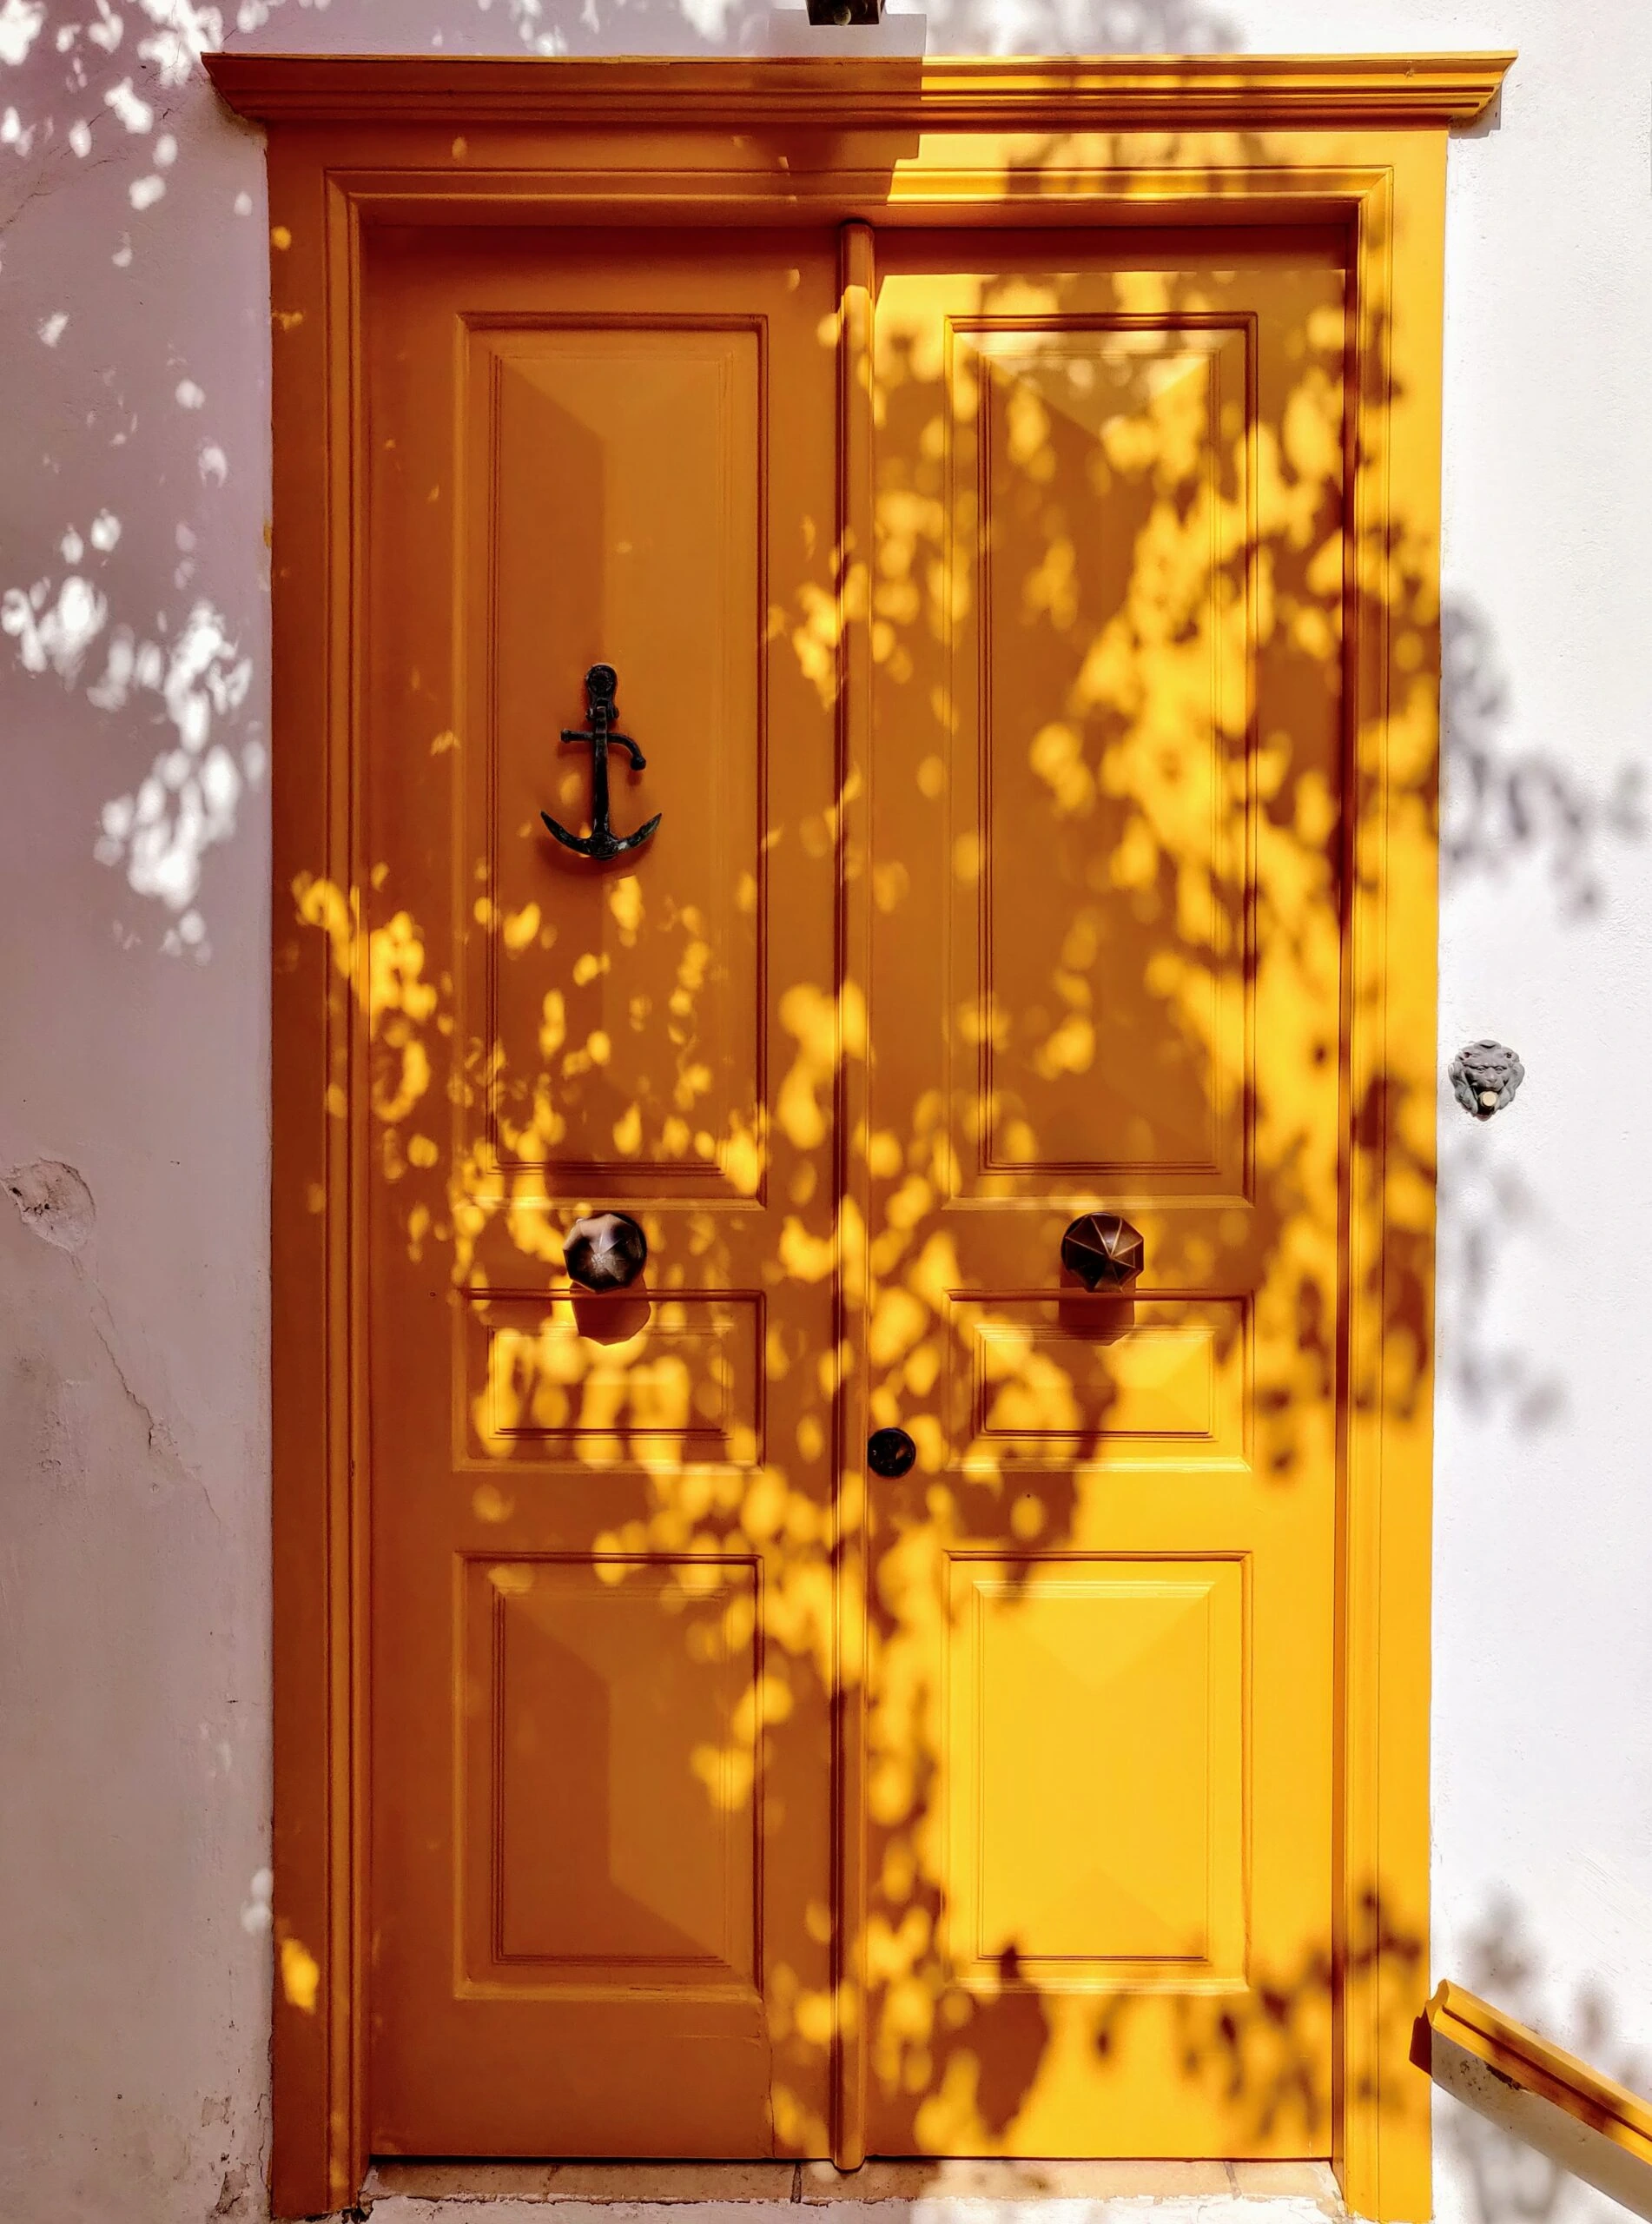 mauricio-munoz-Hydra, Greece Front door golden yellow with white stucco exterior homePublished on April 27, 2021 OnePlus, ONEPLUS A6003